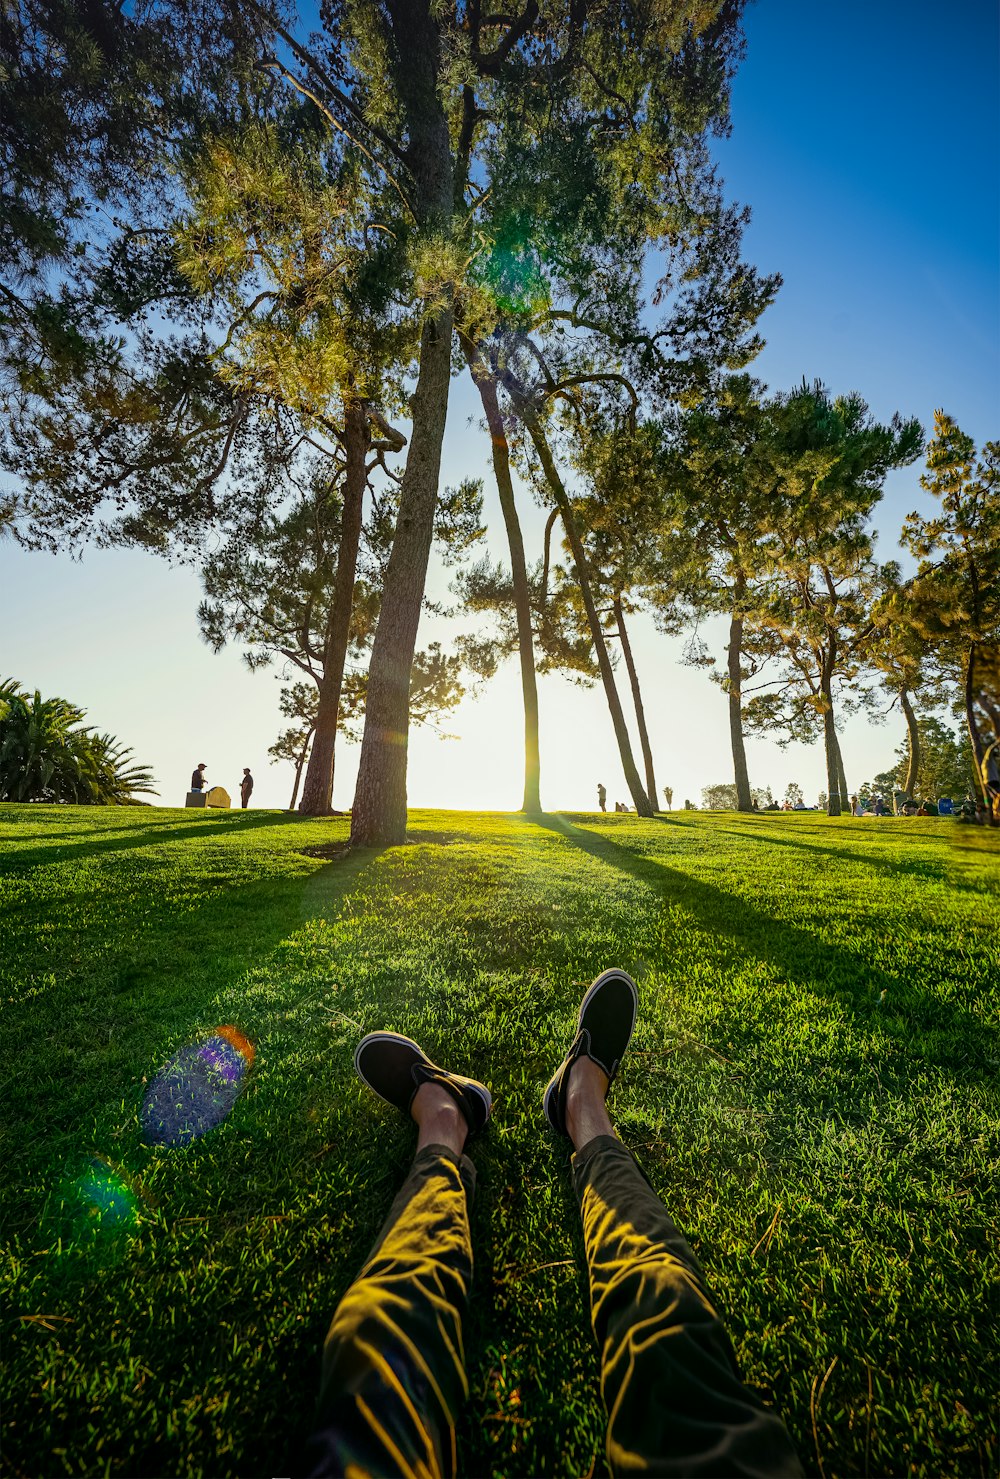 person in black shoes sitting on grass field near trees during daytime